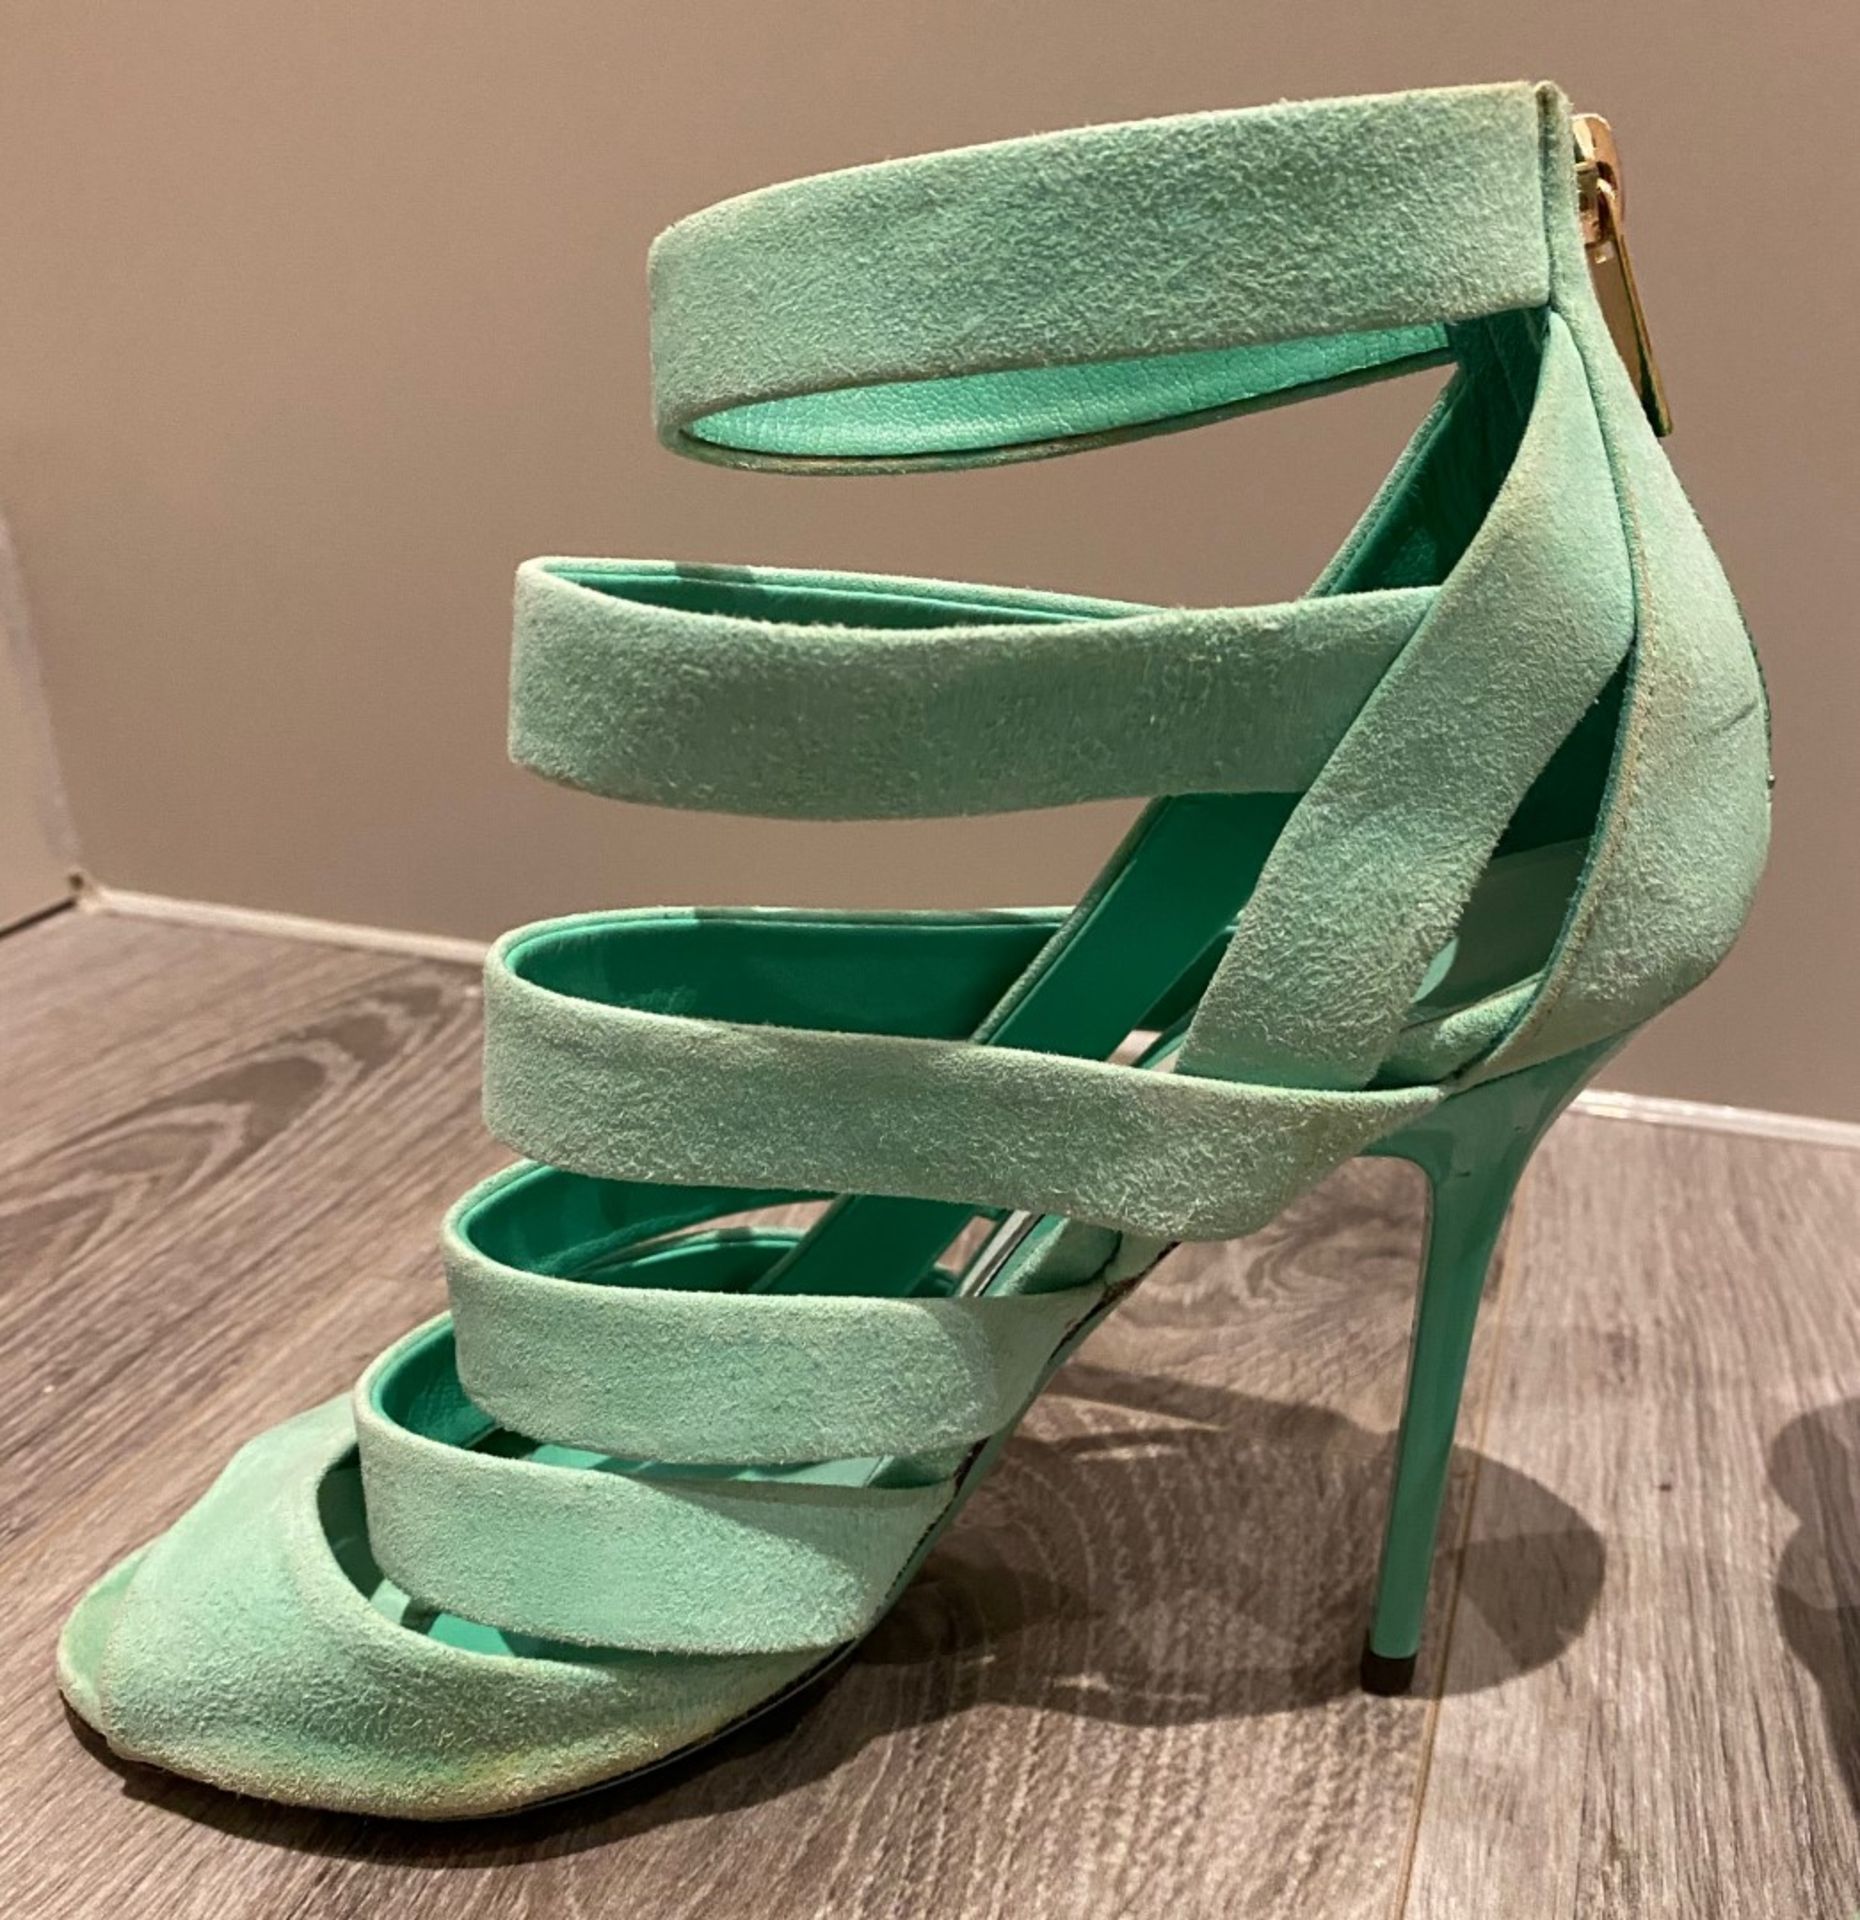 1 x Pair Of Genuine Jimmy Choo High Heel Shoes In Mint Green - Size: 36 - Preowned in Worn Condition